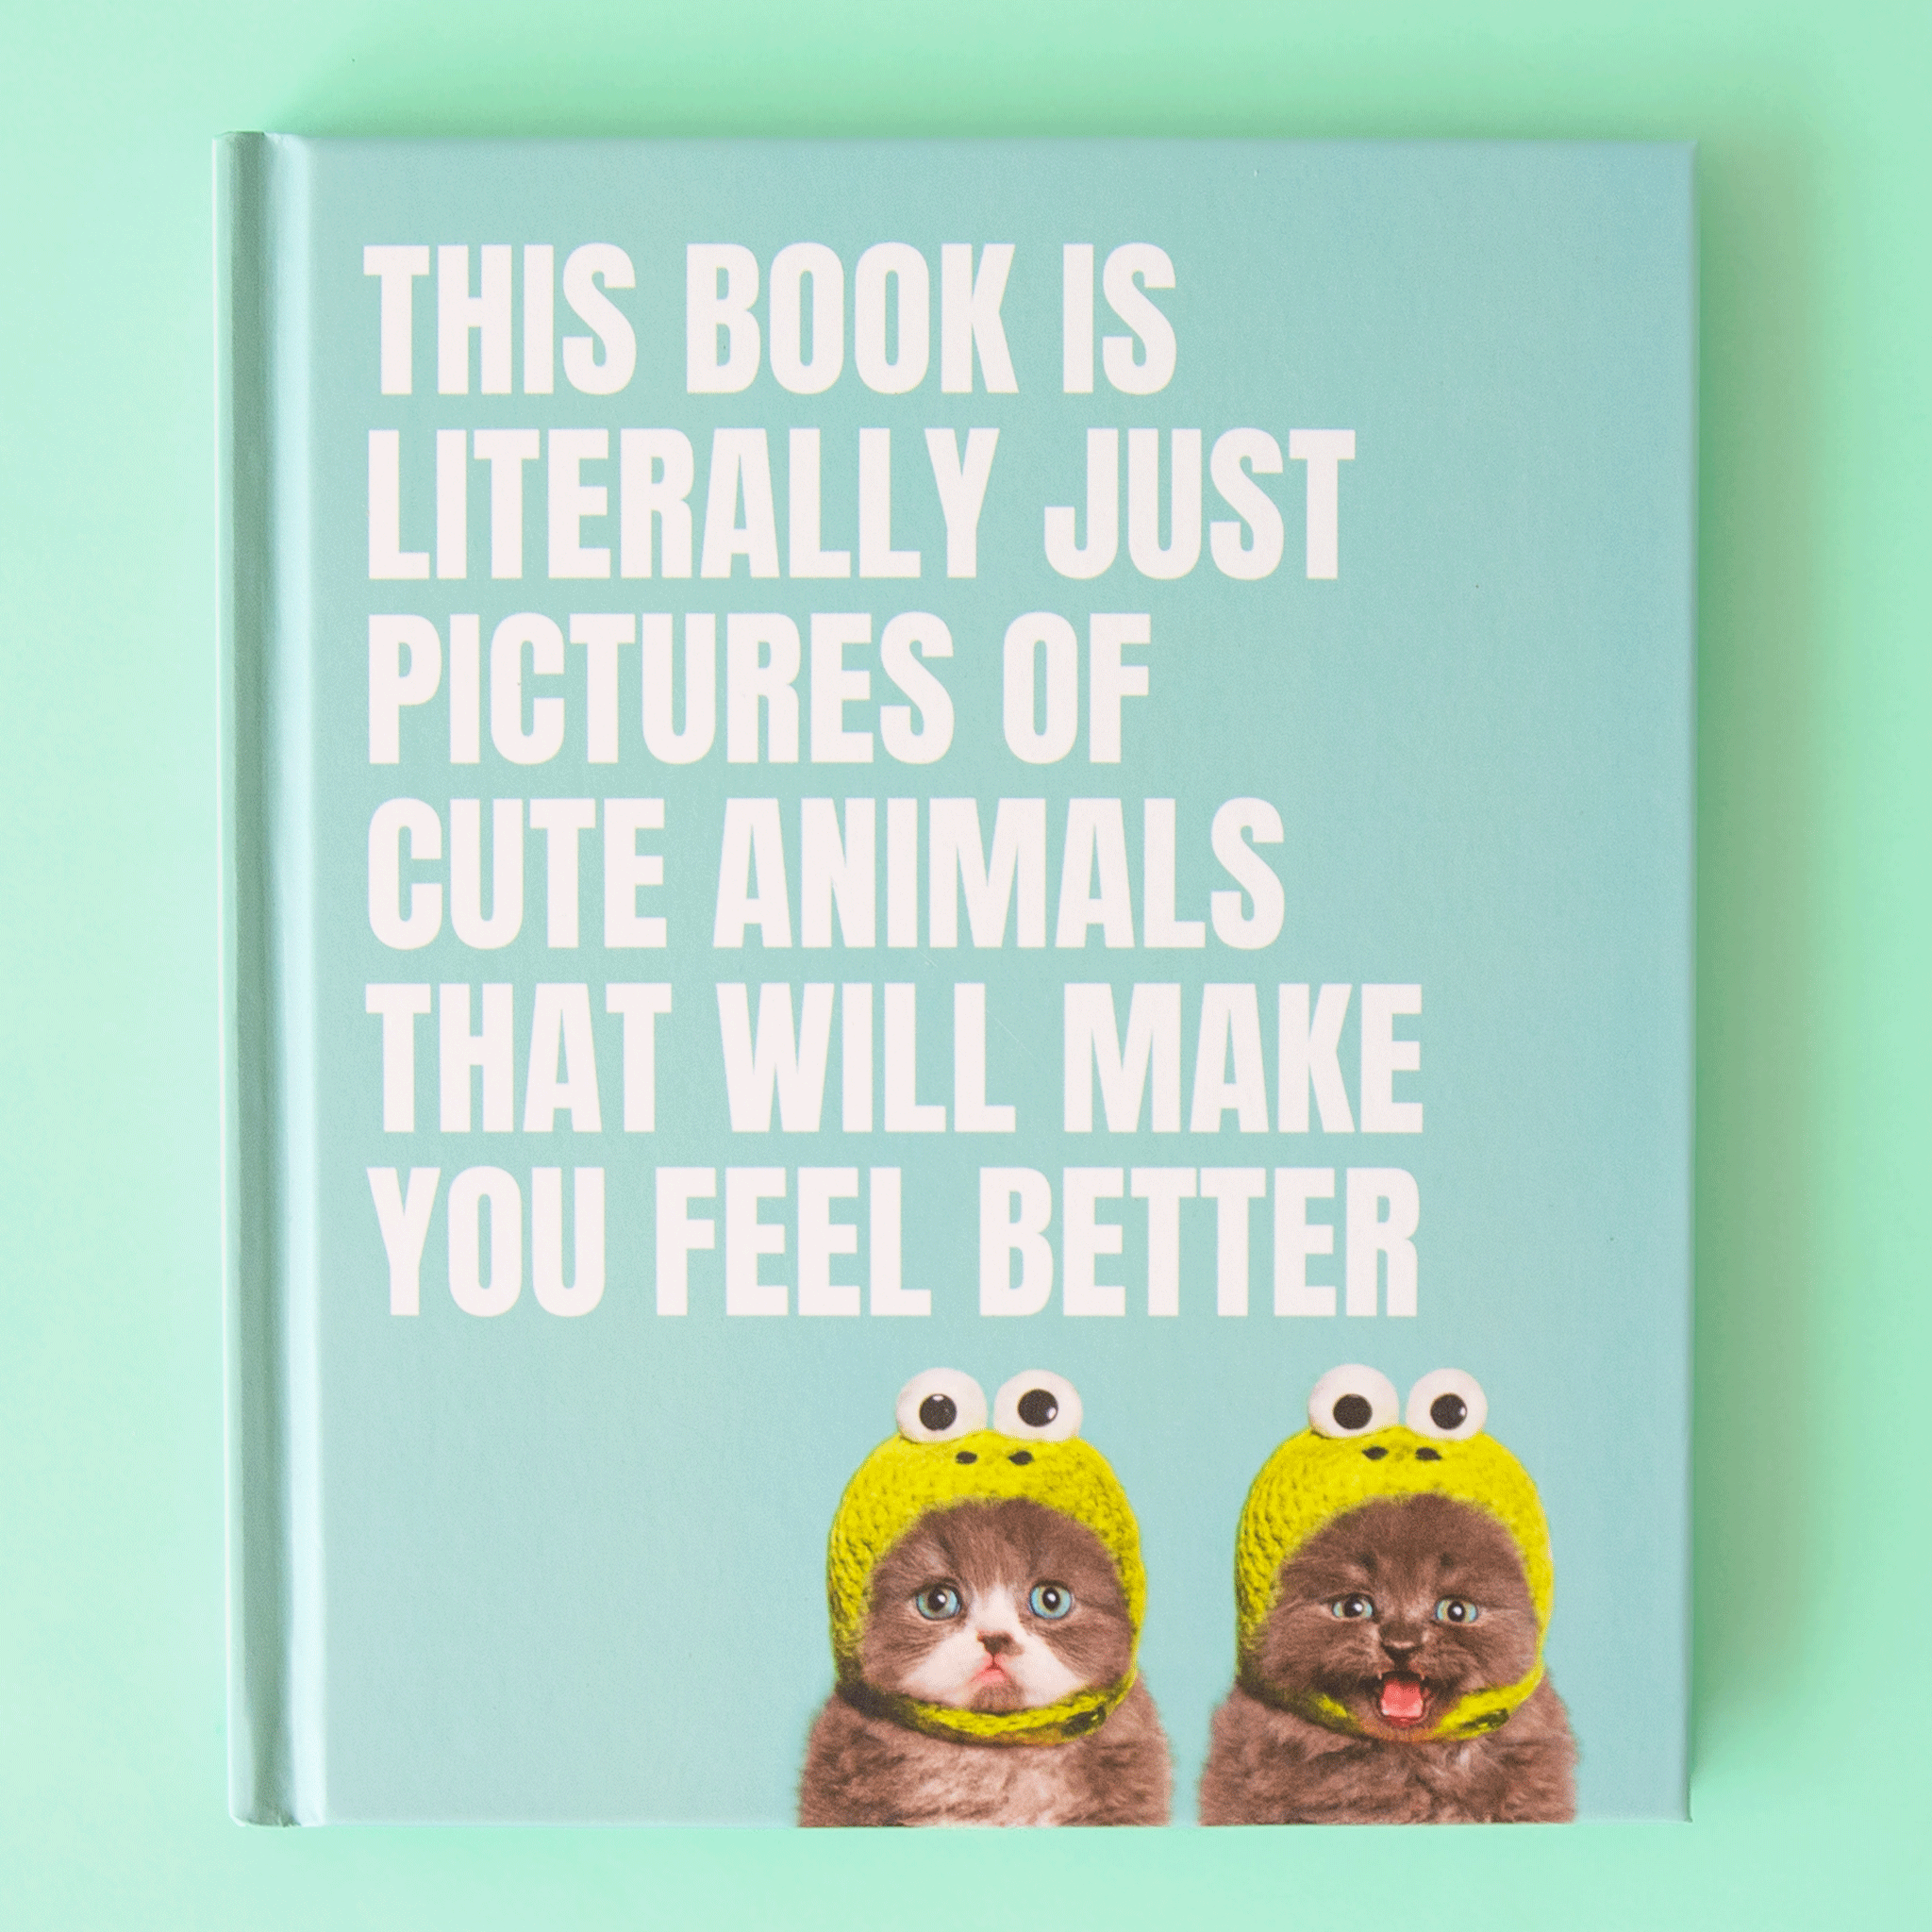 On a green background is a blue book cover with two small grey kittens and white text that reads, "This Book Is Literally Just Pictures Of Cute Animals That Will Make You Feel Better".